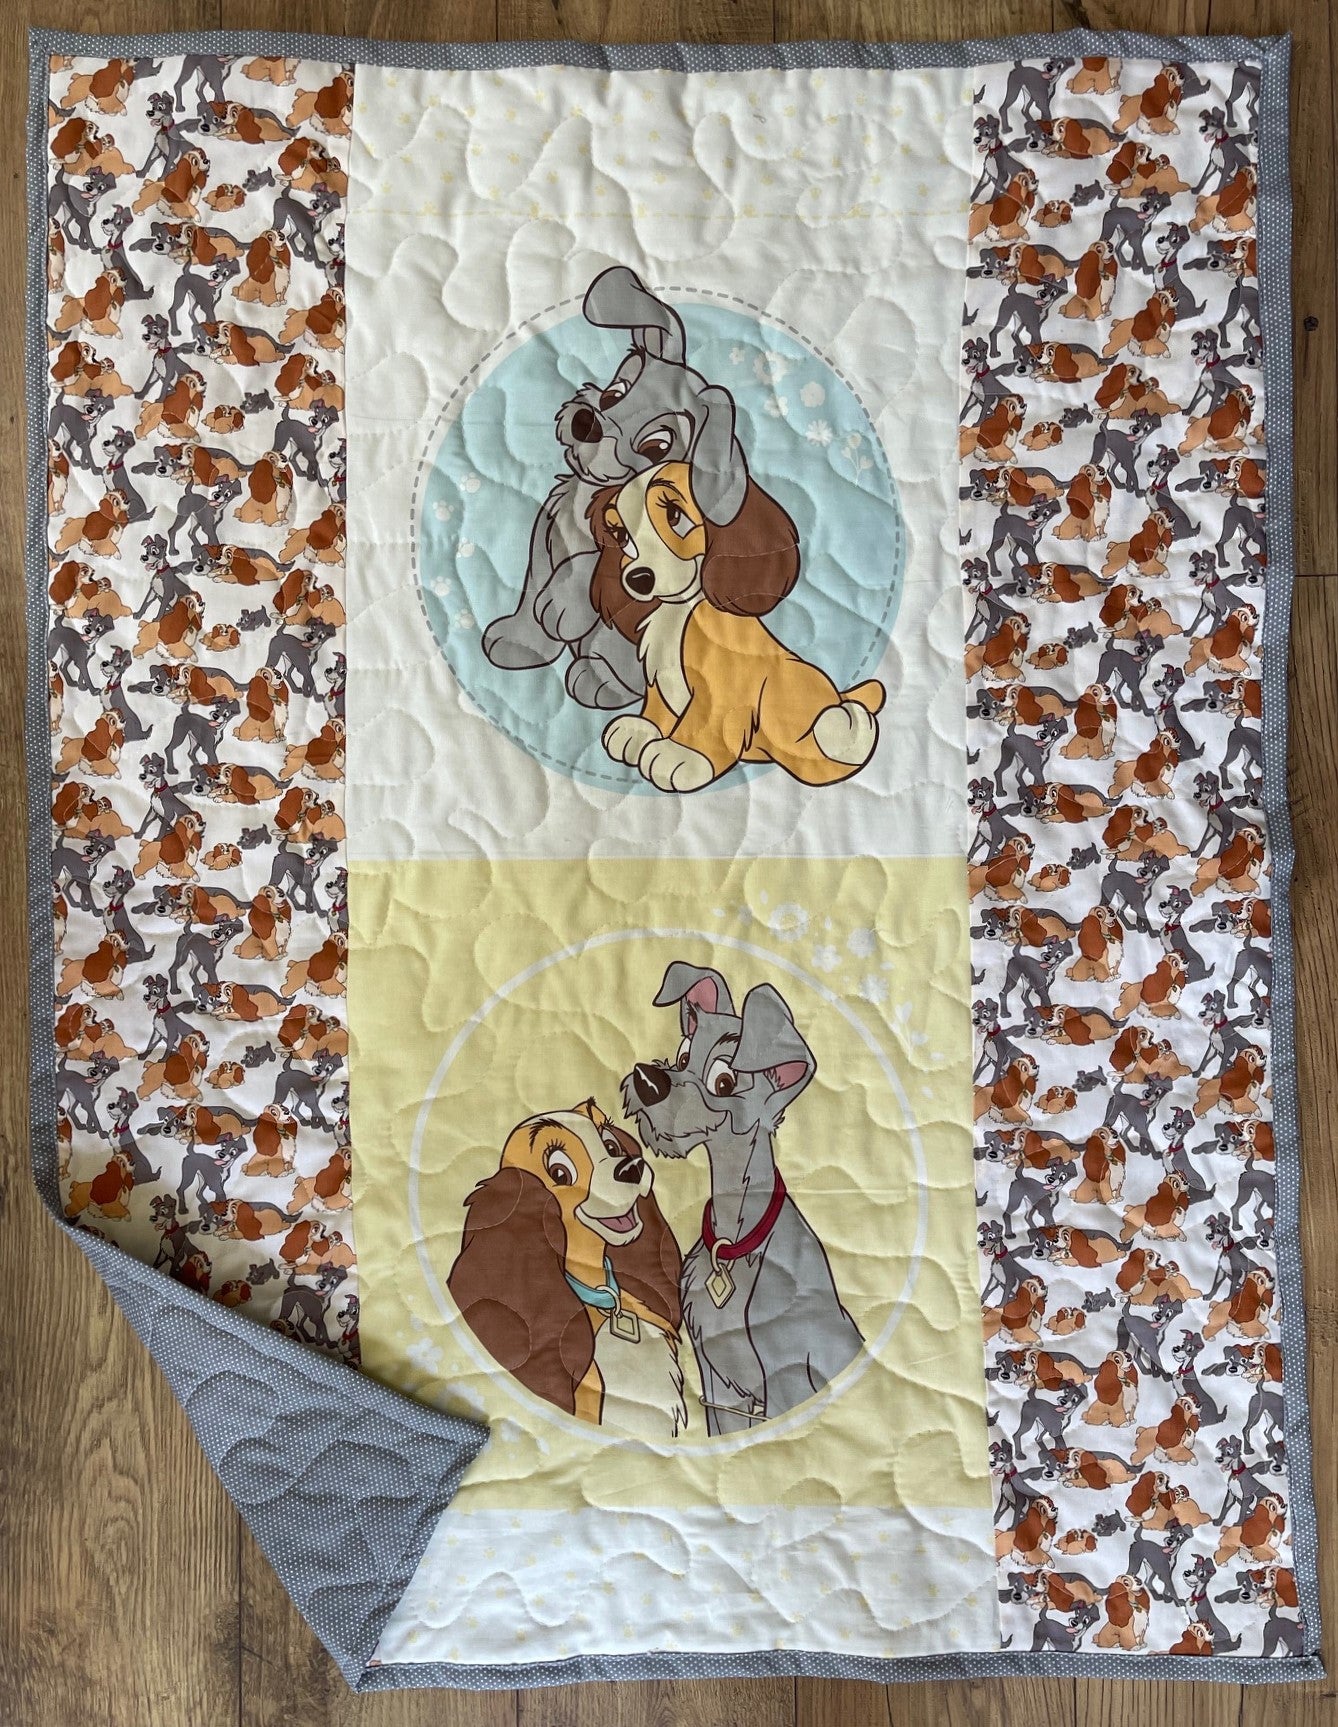 DISNEY CLASSIC LADY AND THE TRAMP INSPIRED QUILTED BLANKET